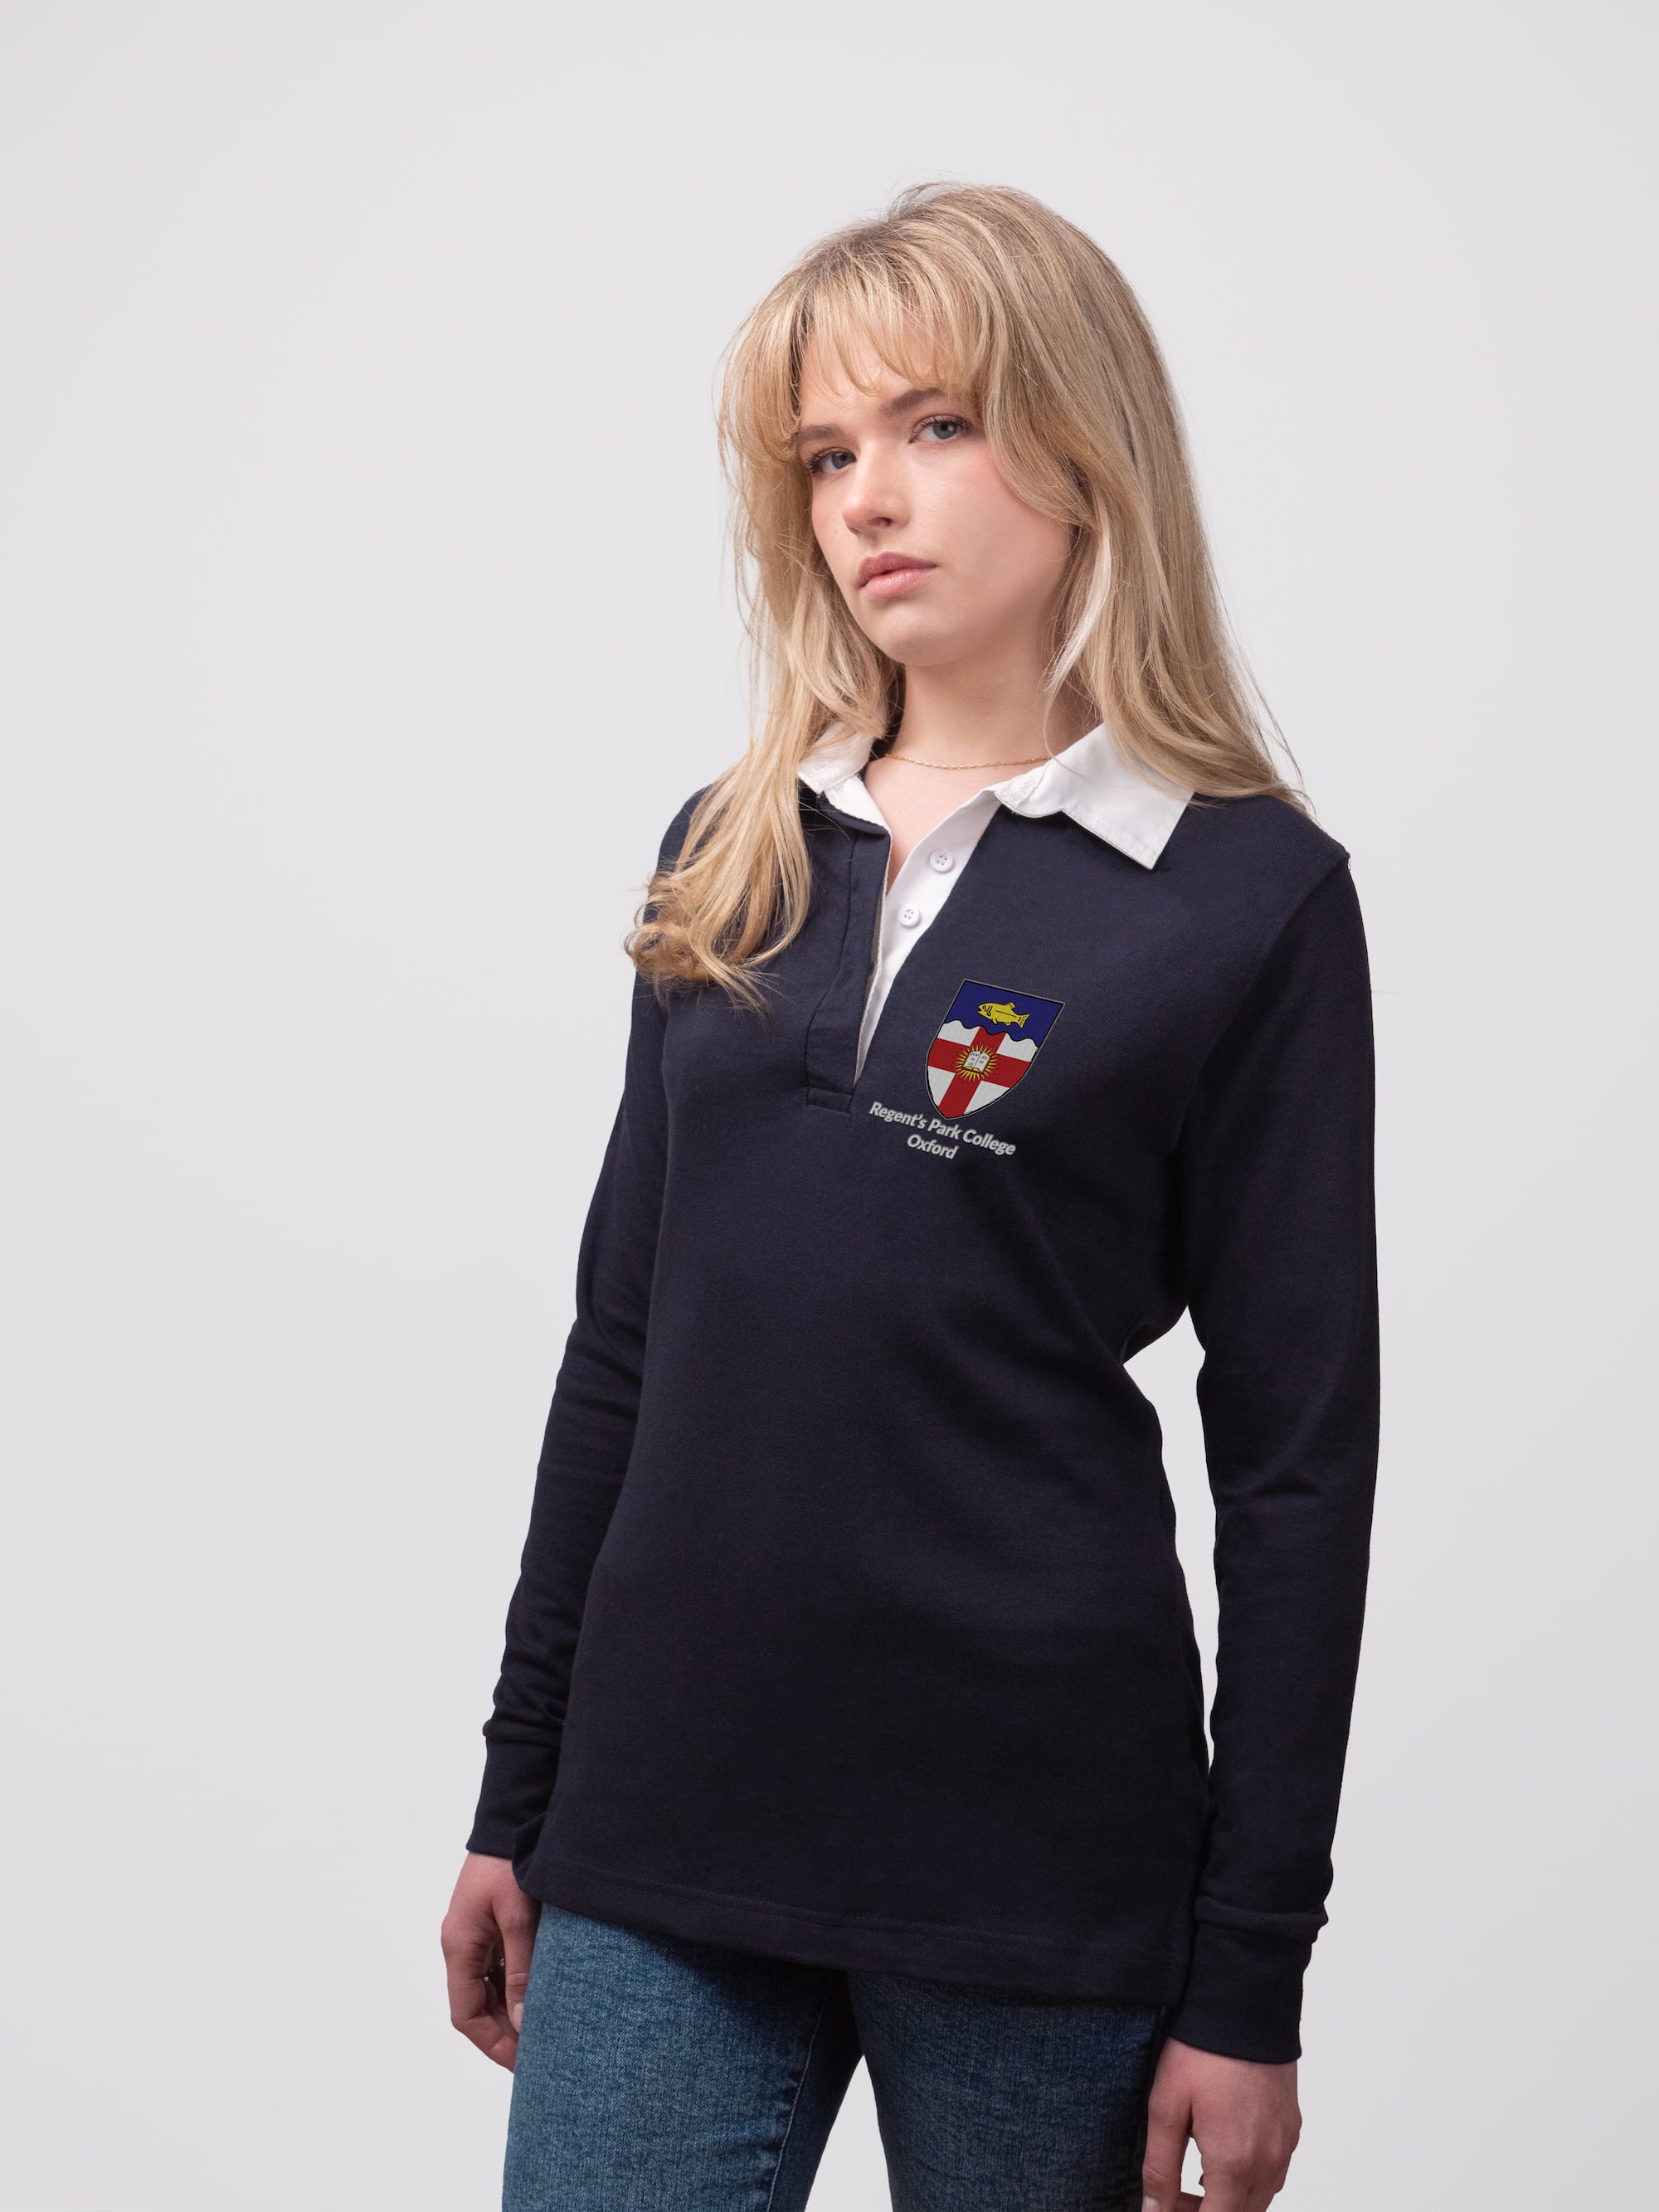 Student wearing a navy Regent's Park College rugby shirt with embroidered crest